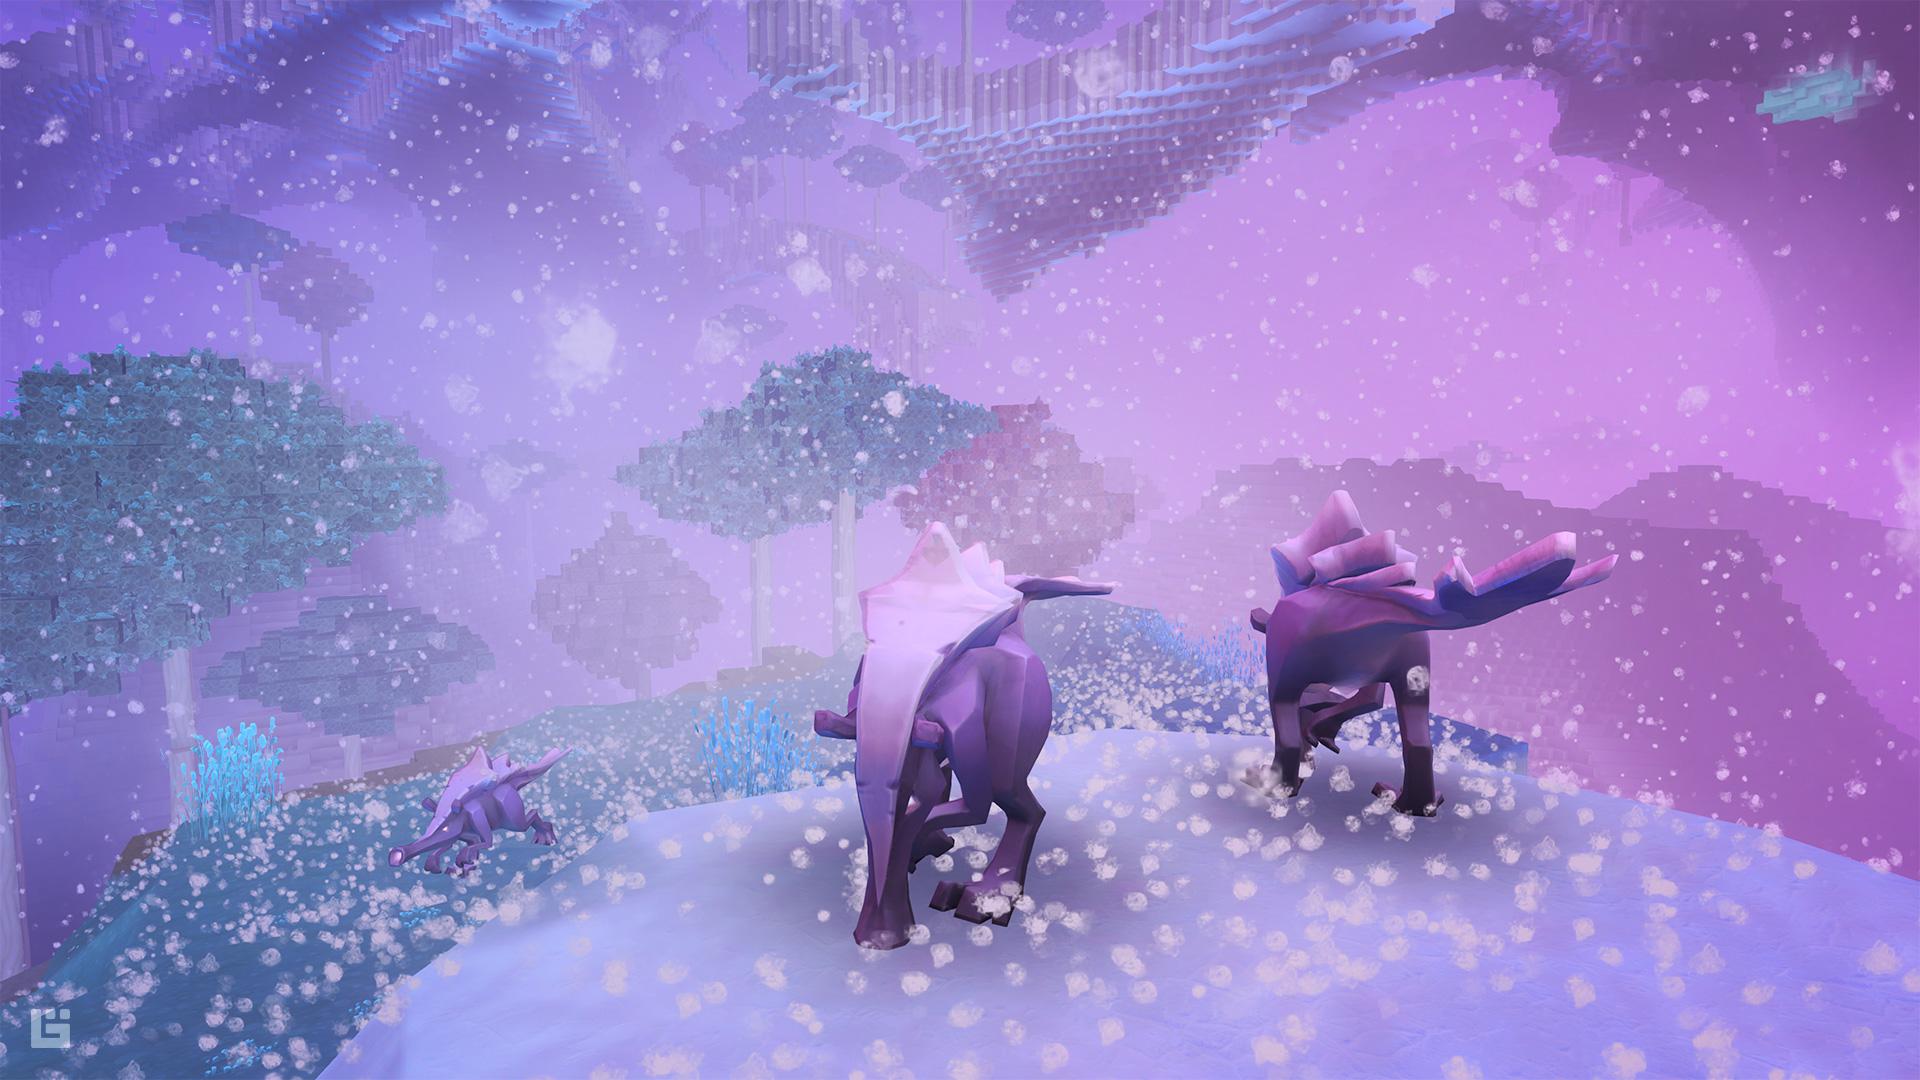 Screenshot №16 from game Boundless